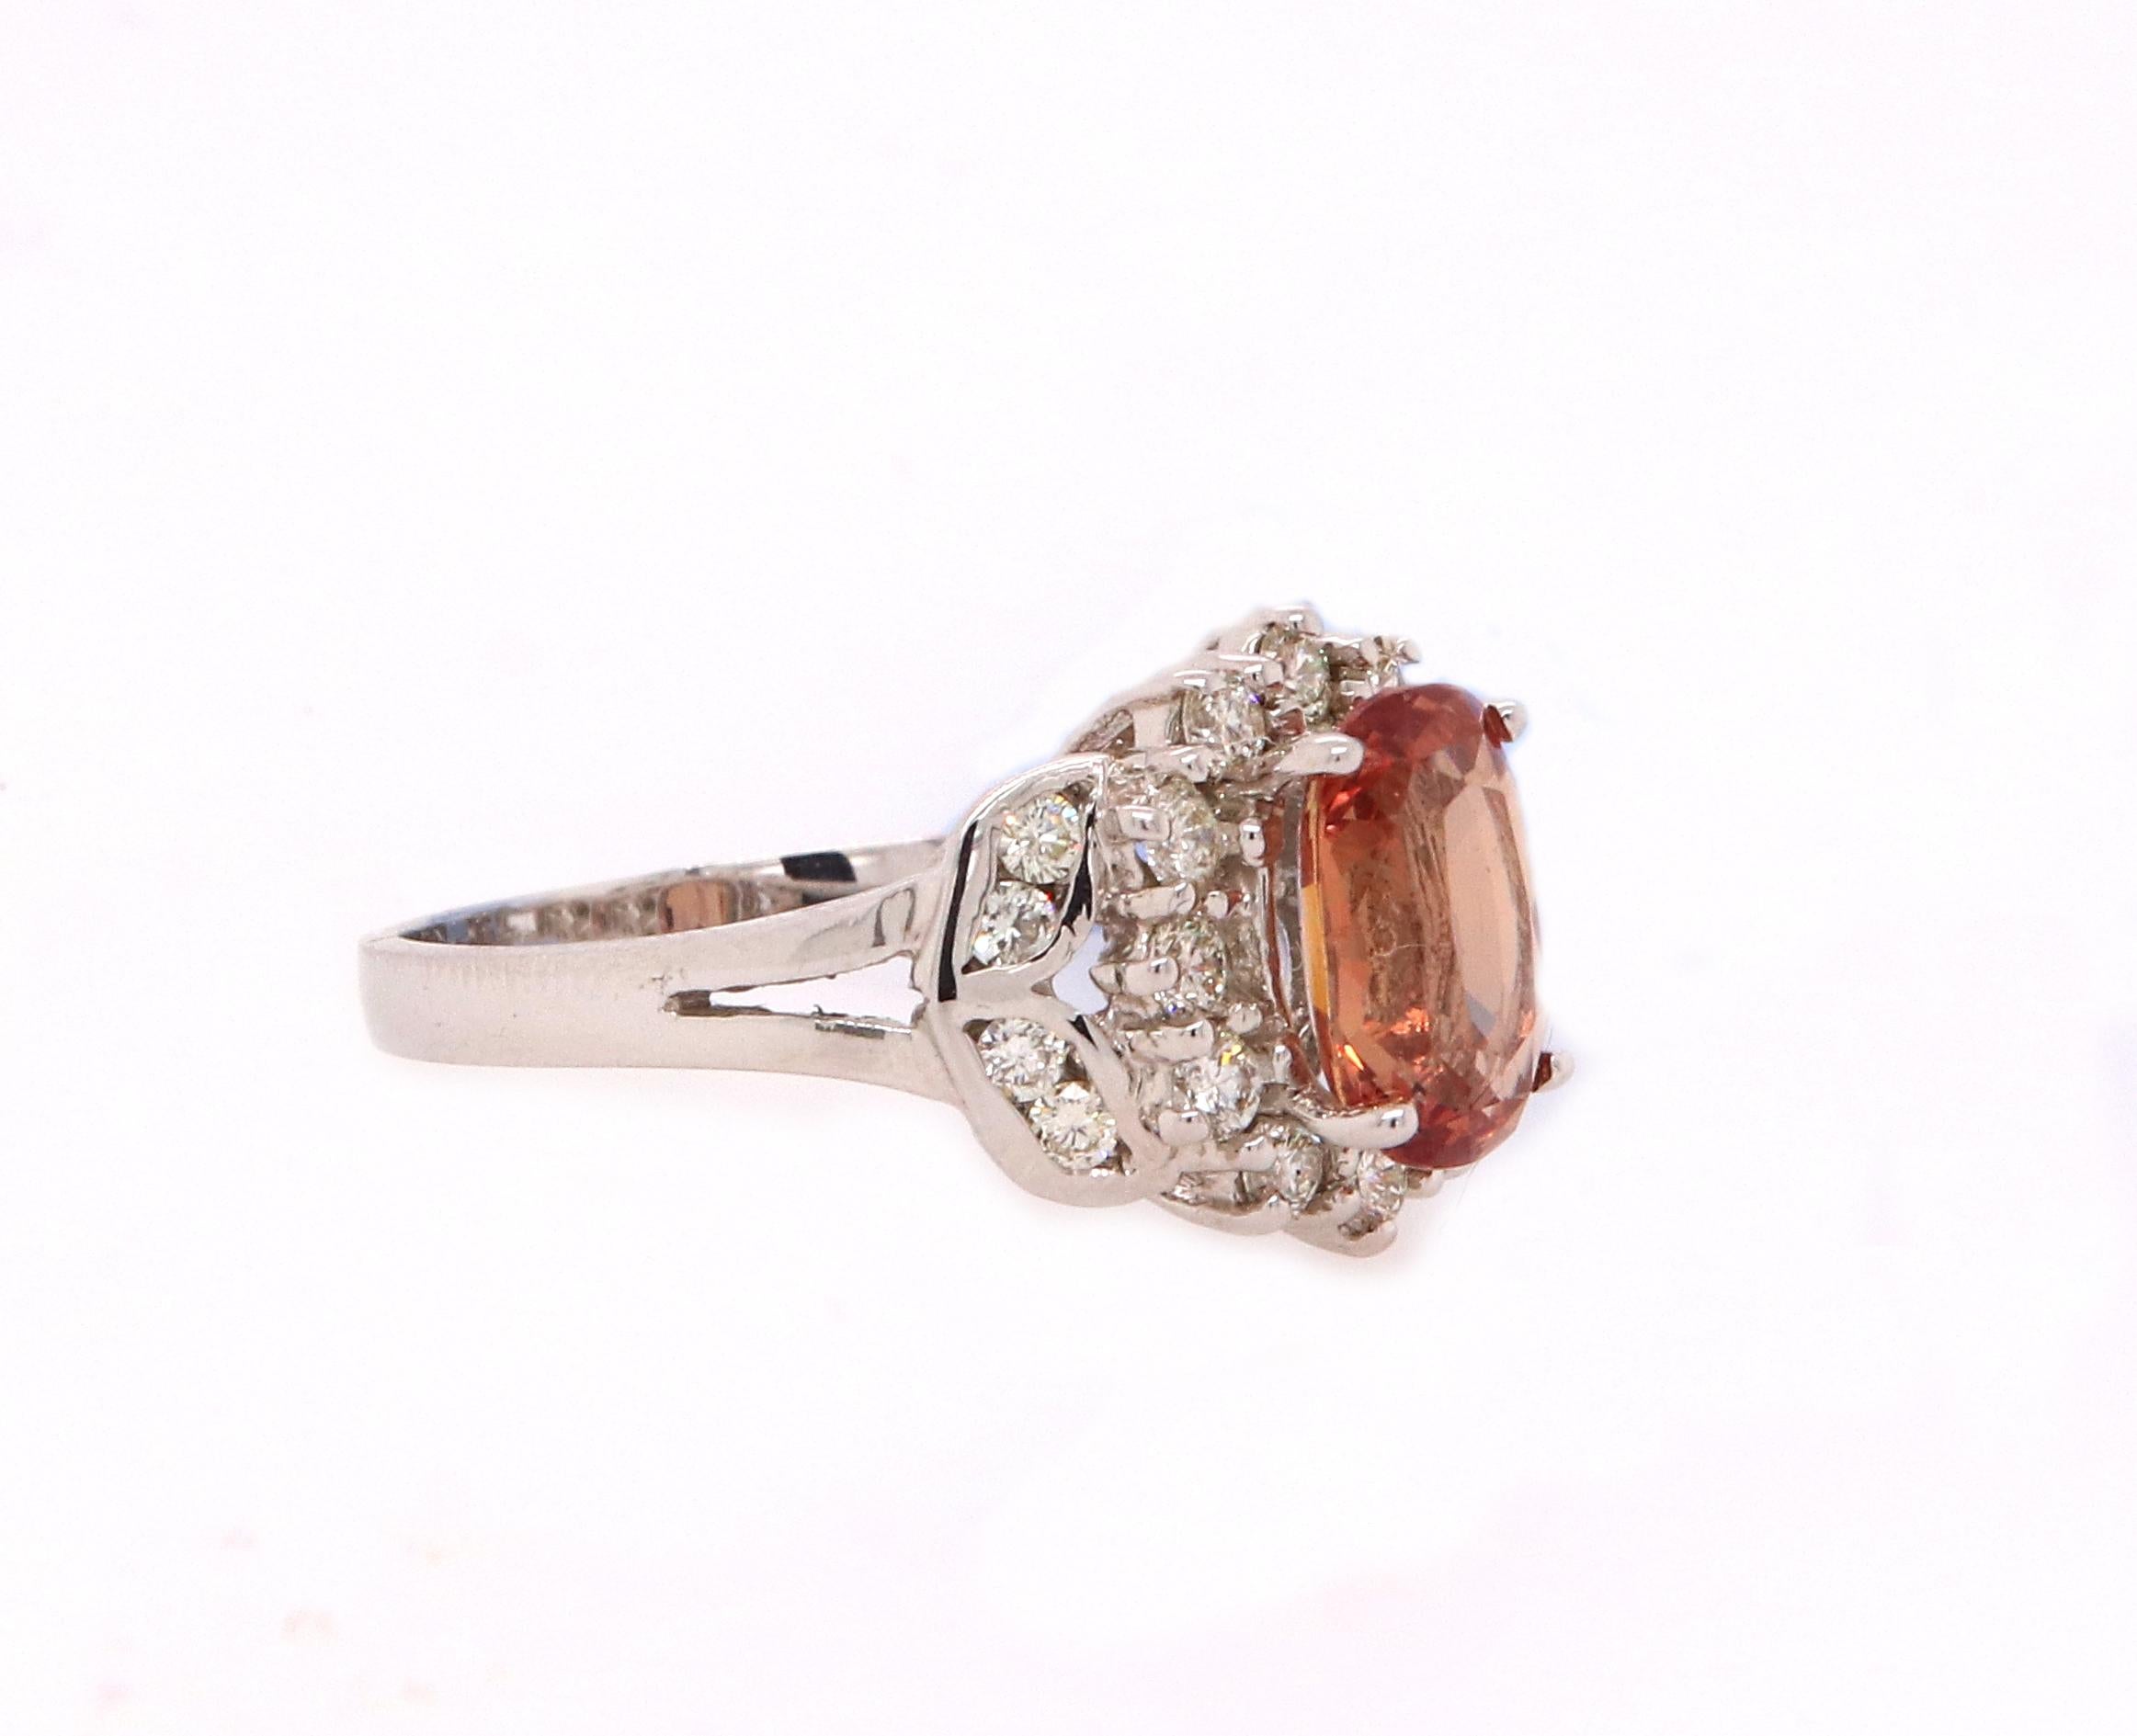 Material: 18K White Gold 
Center Stone Details: 1 Cushion Cut Padparadscha Sapphire at 1.86 Carats - Measuring at 8.49 x 5.65 x 3.81 mm
Diamond Details: 20 Brilliant Round White Diamonds at 0.46 Carats- Clarity: SI  / Color: H-I
Complimentary sizing